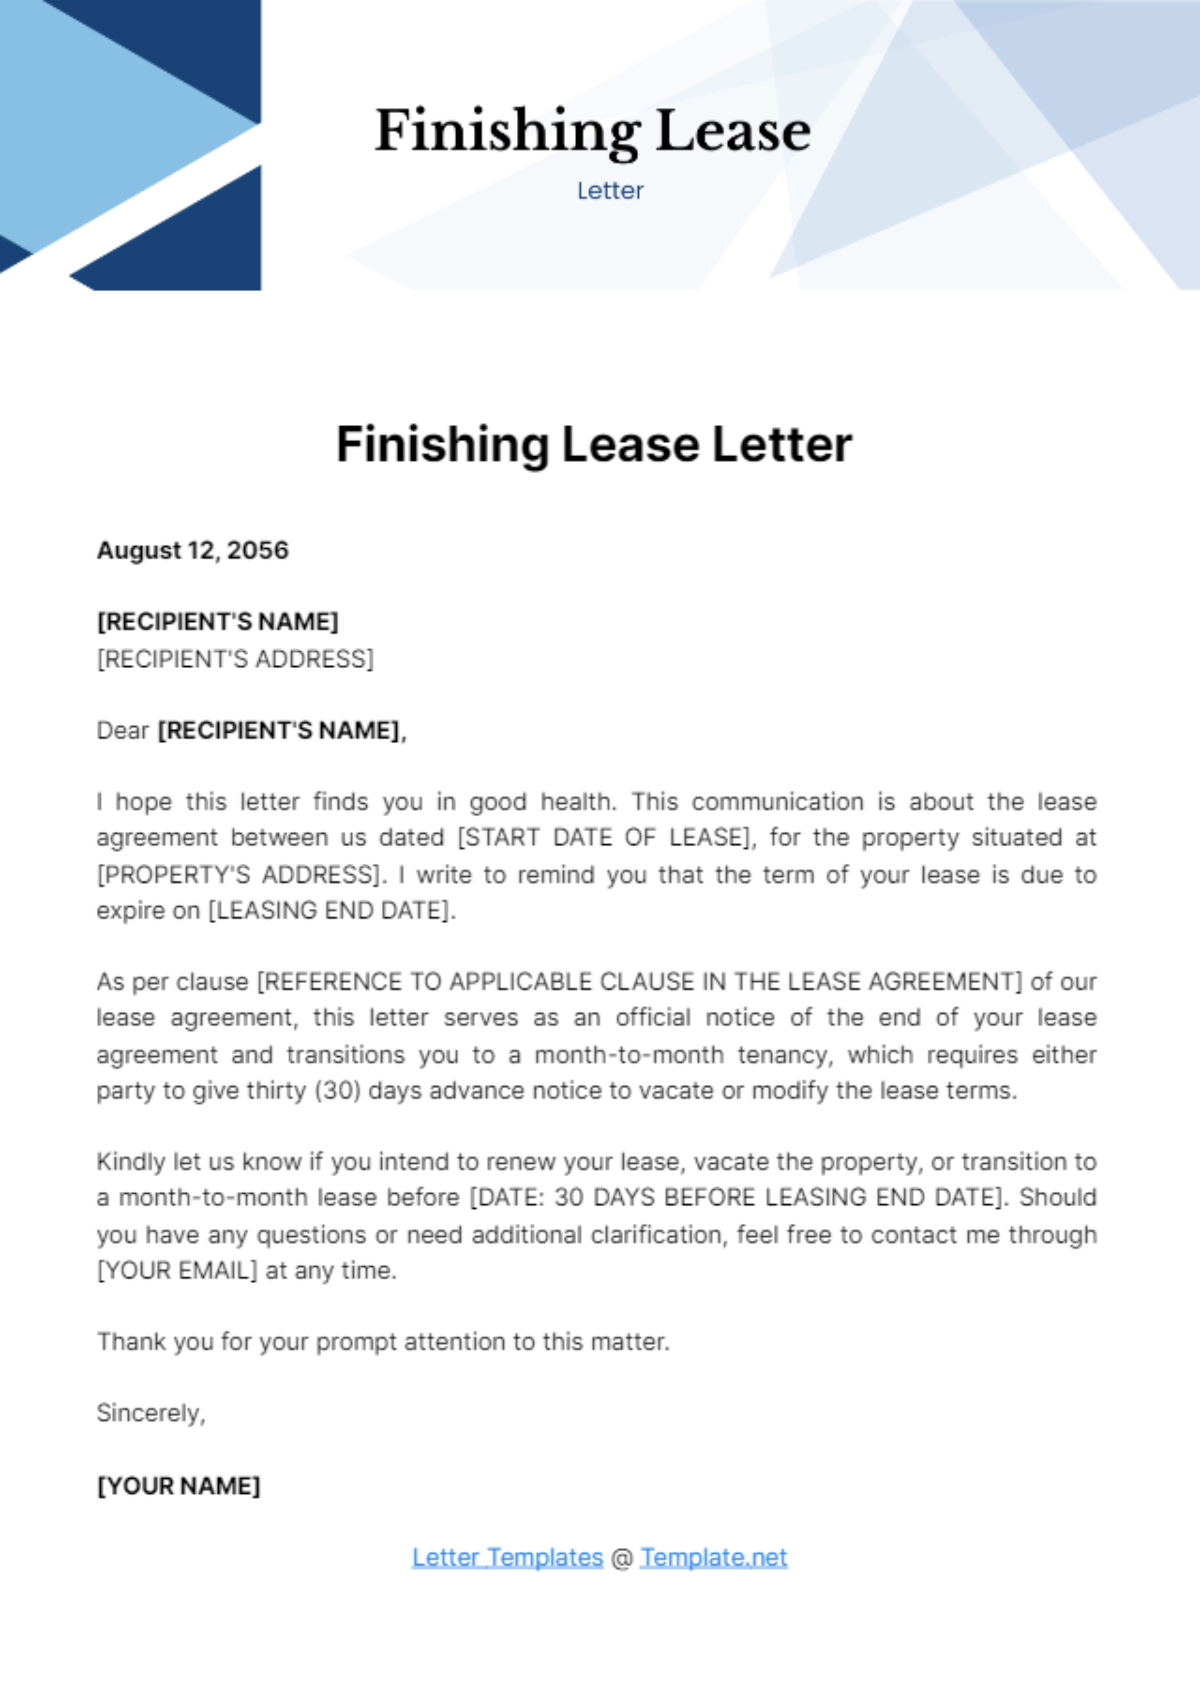 Finishing Lease Letter Template